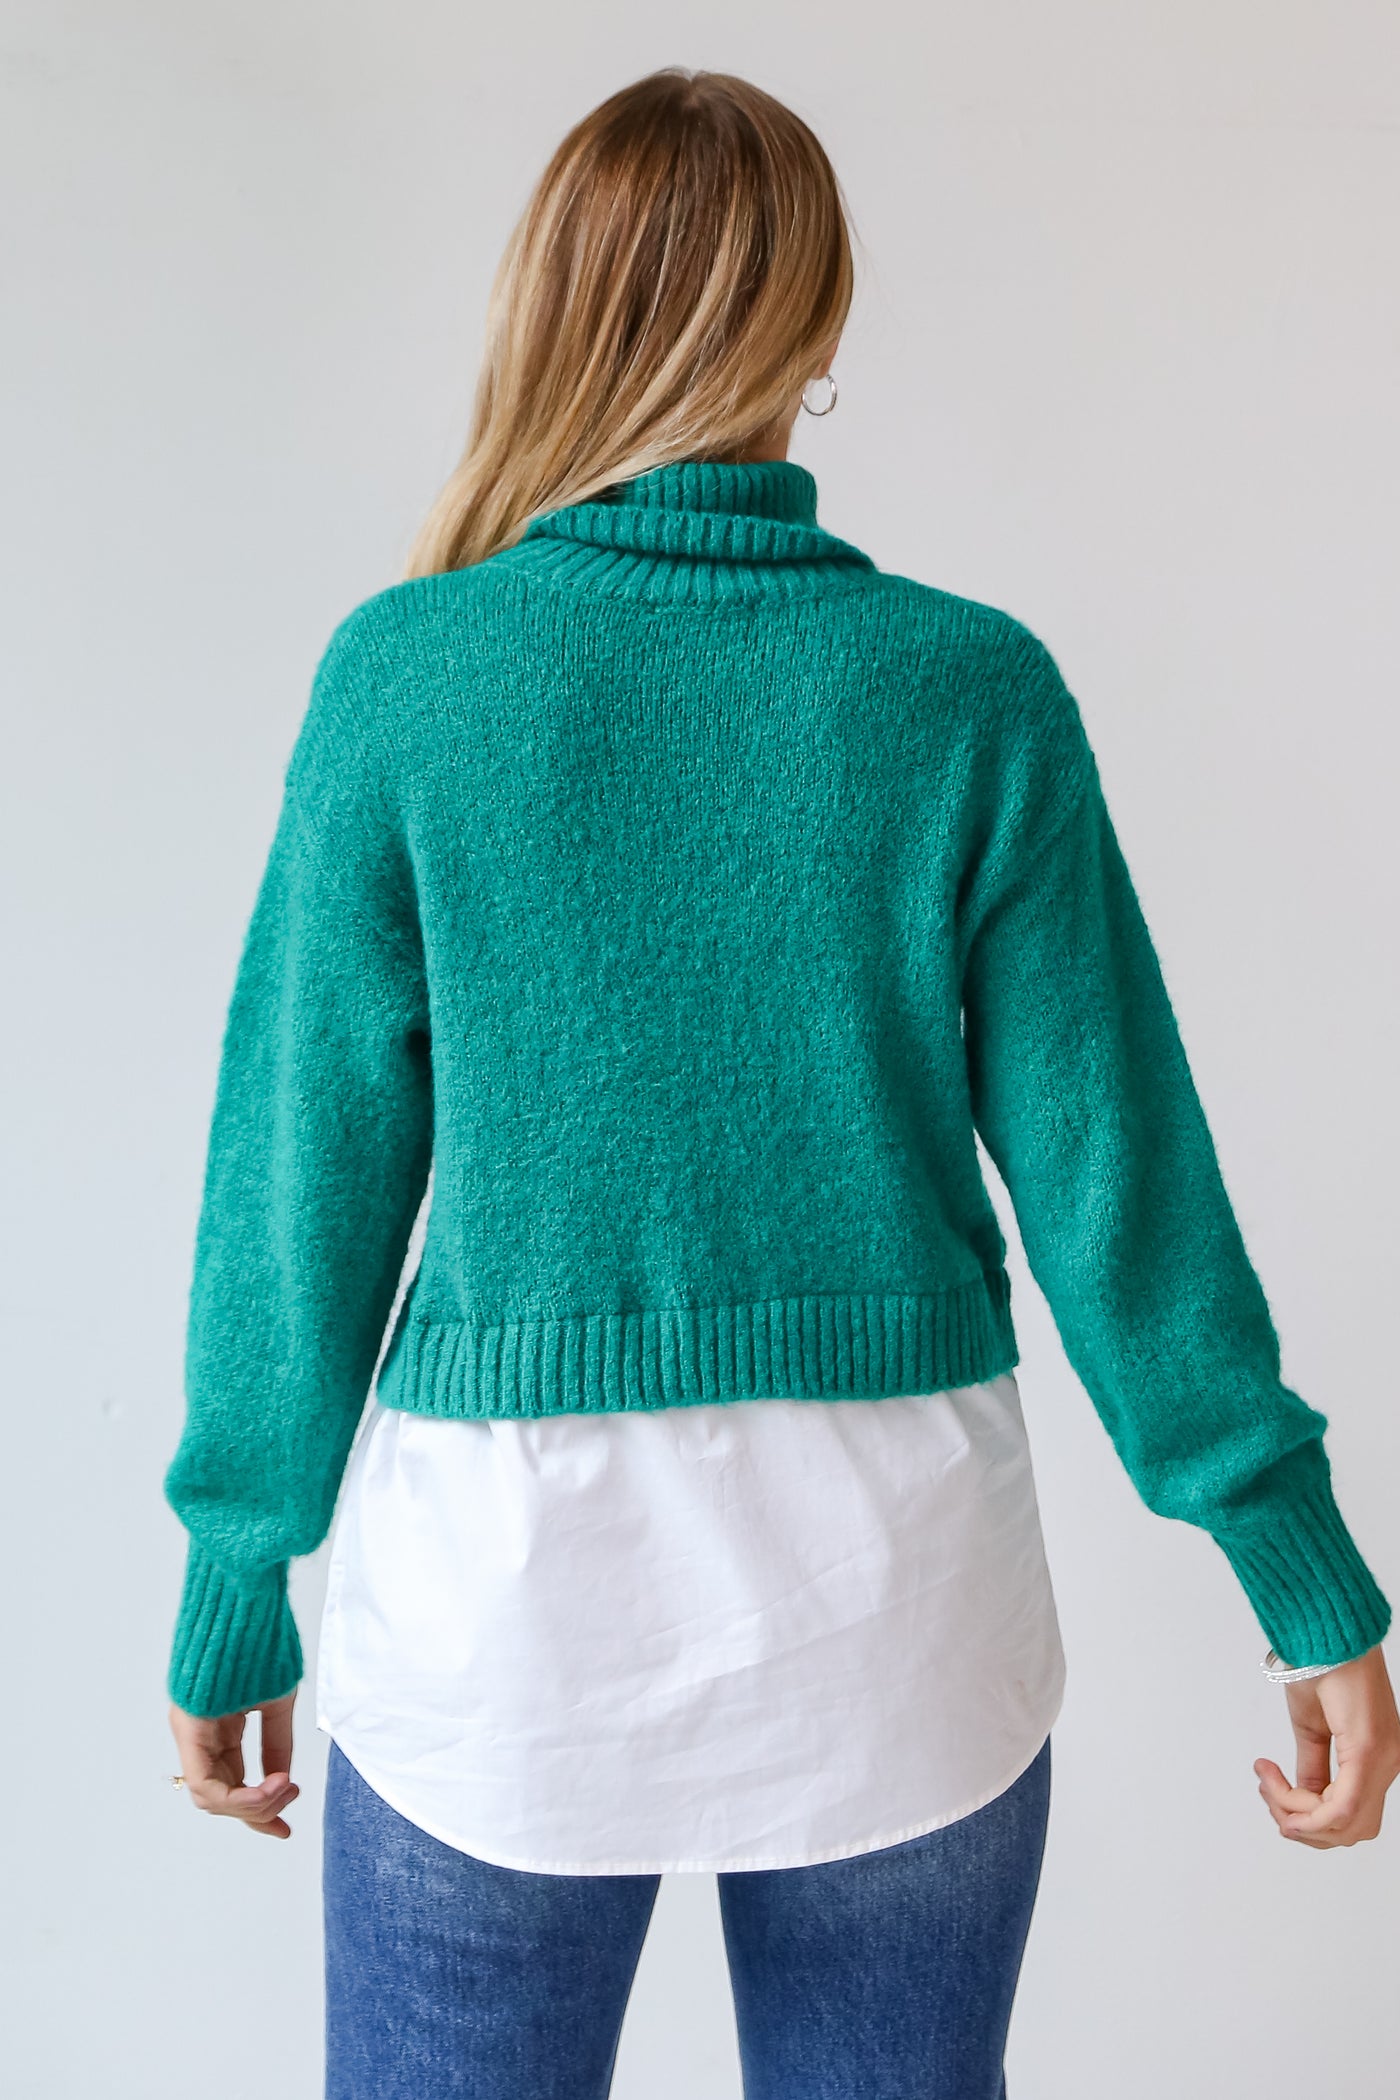 cute Green Cable Knit Sweater Blouse